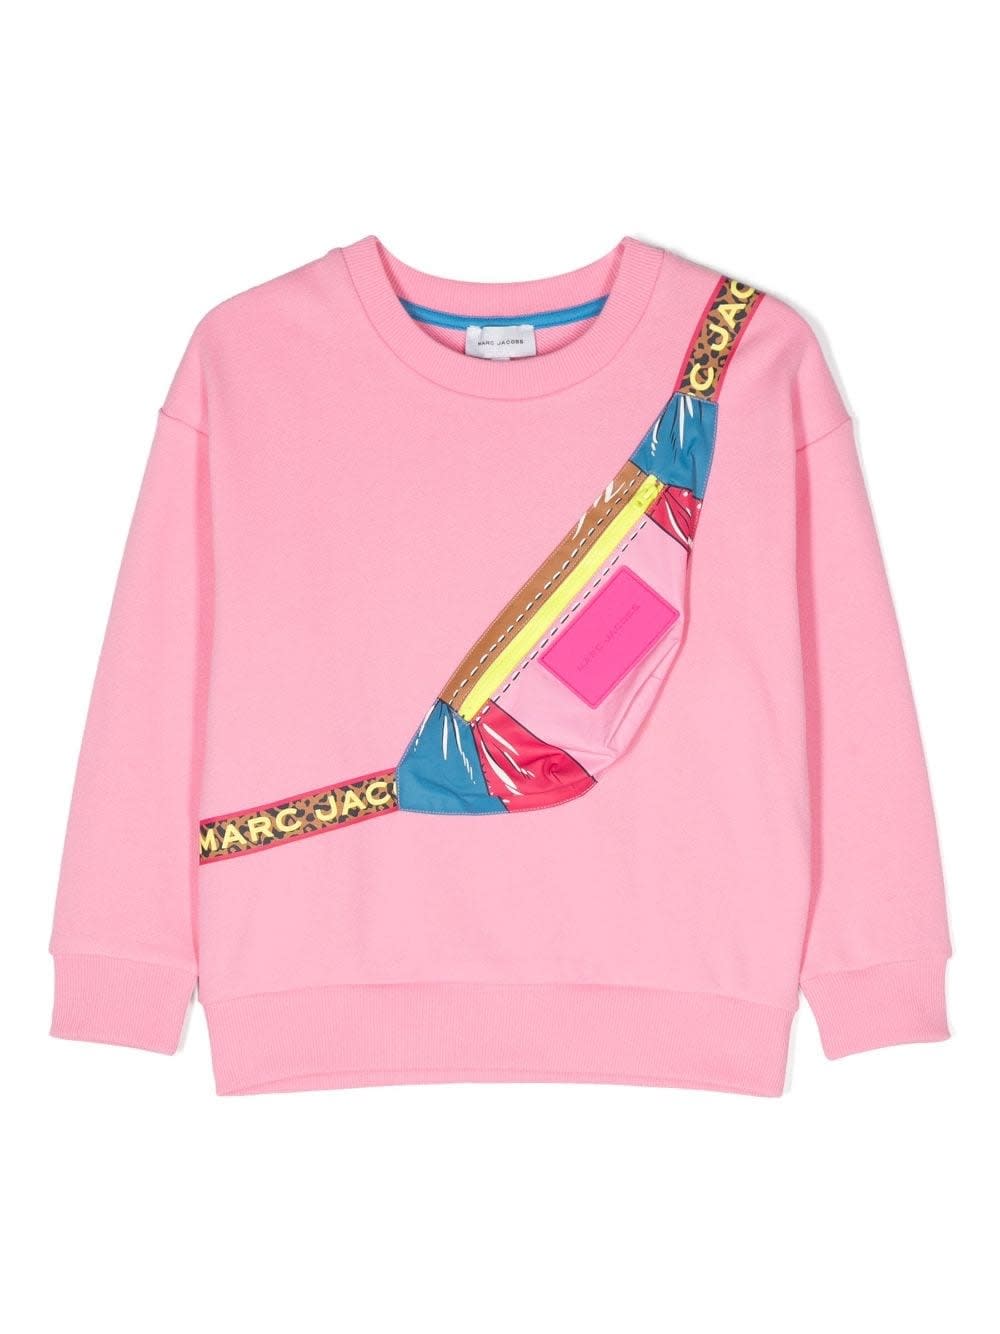 MARC JACOBS SWEATSHIRT WITH APPLICATION